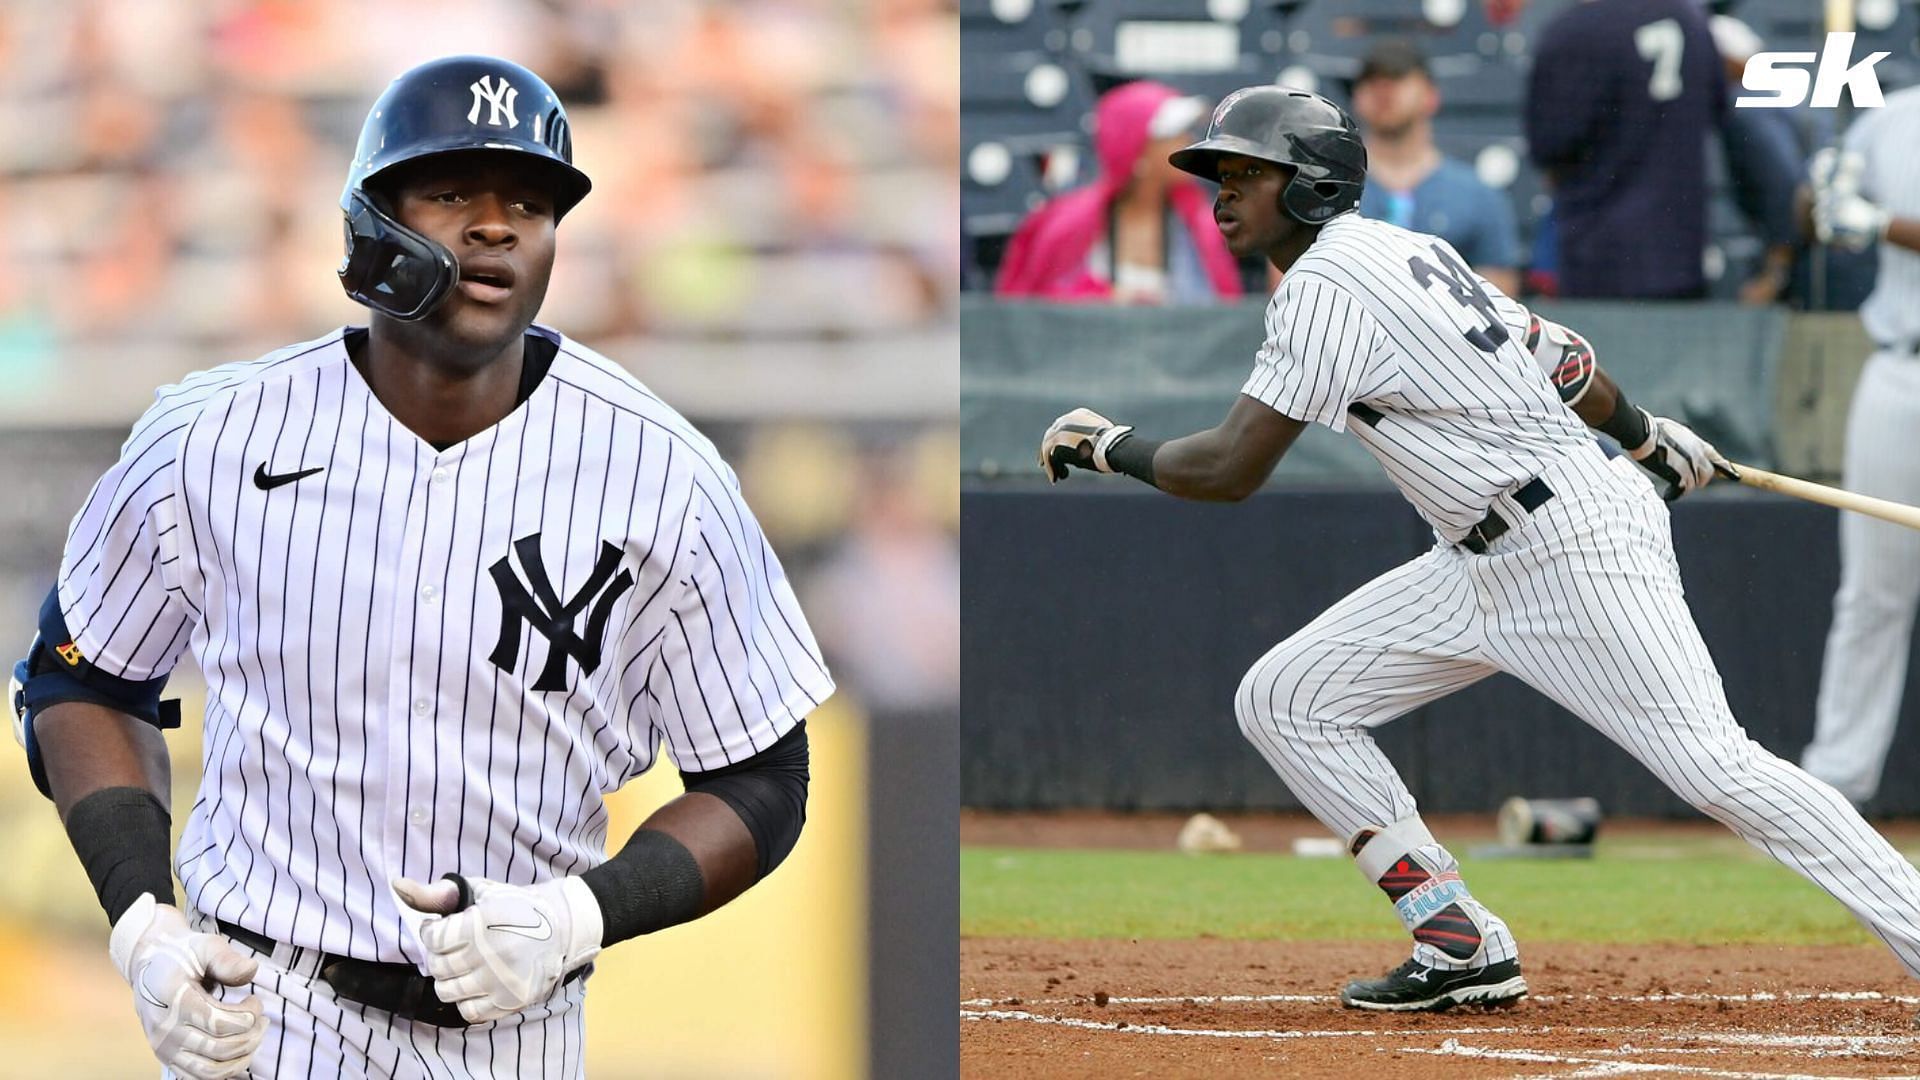 Estevan Florial has been traded from the Yankees in a move that has fans split